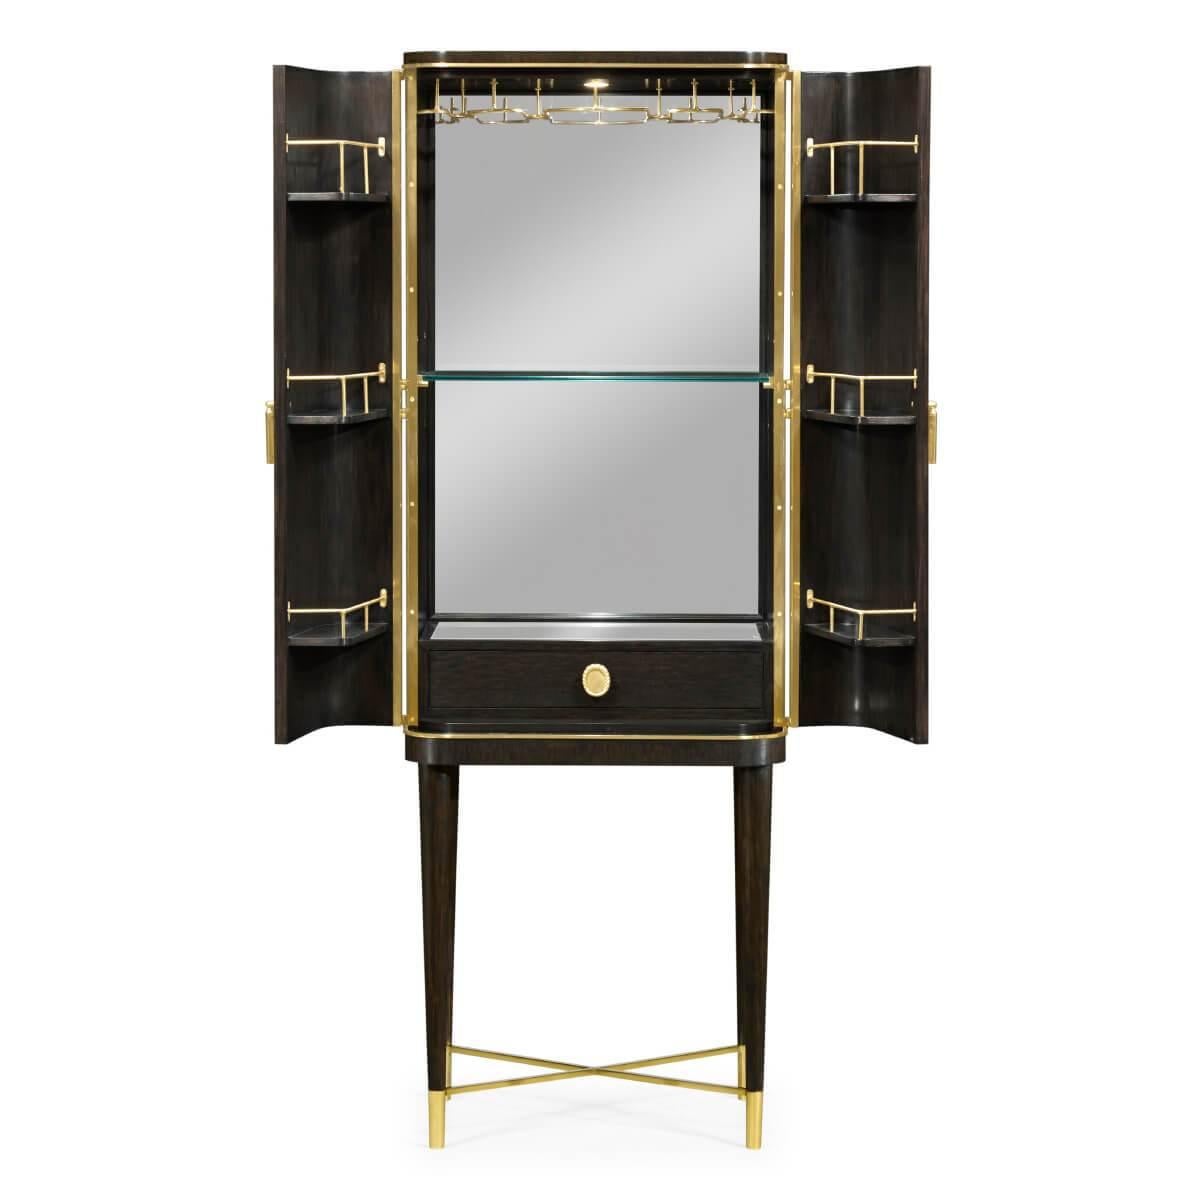 A midcentury style two-door bar cabinet with chinoiserie decorated etched brass doors, a fitted mirror back interior with a glass shelf, glass racks, storage shelves, and single drawer raised on tapered leg base having brass feet and an 'X'